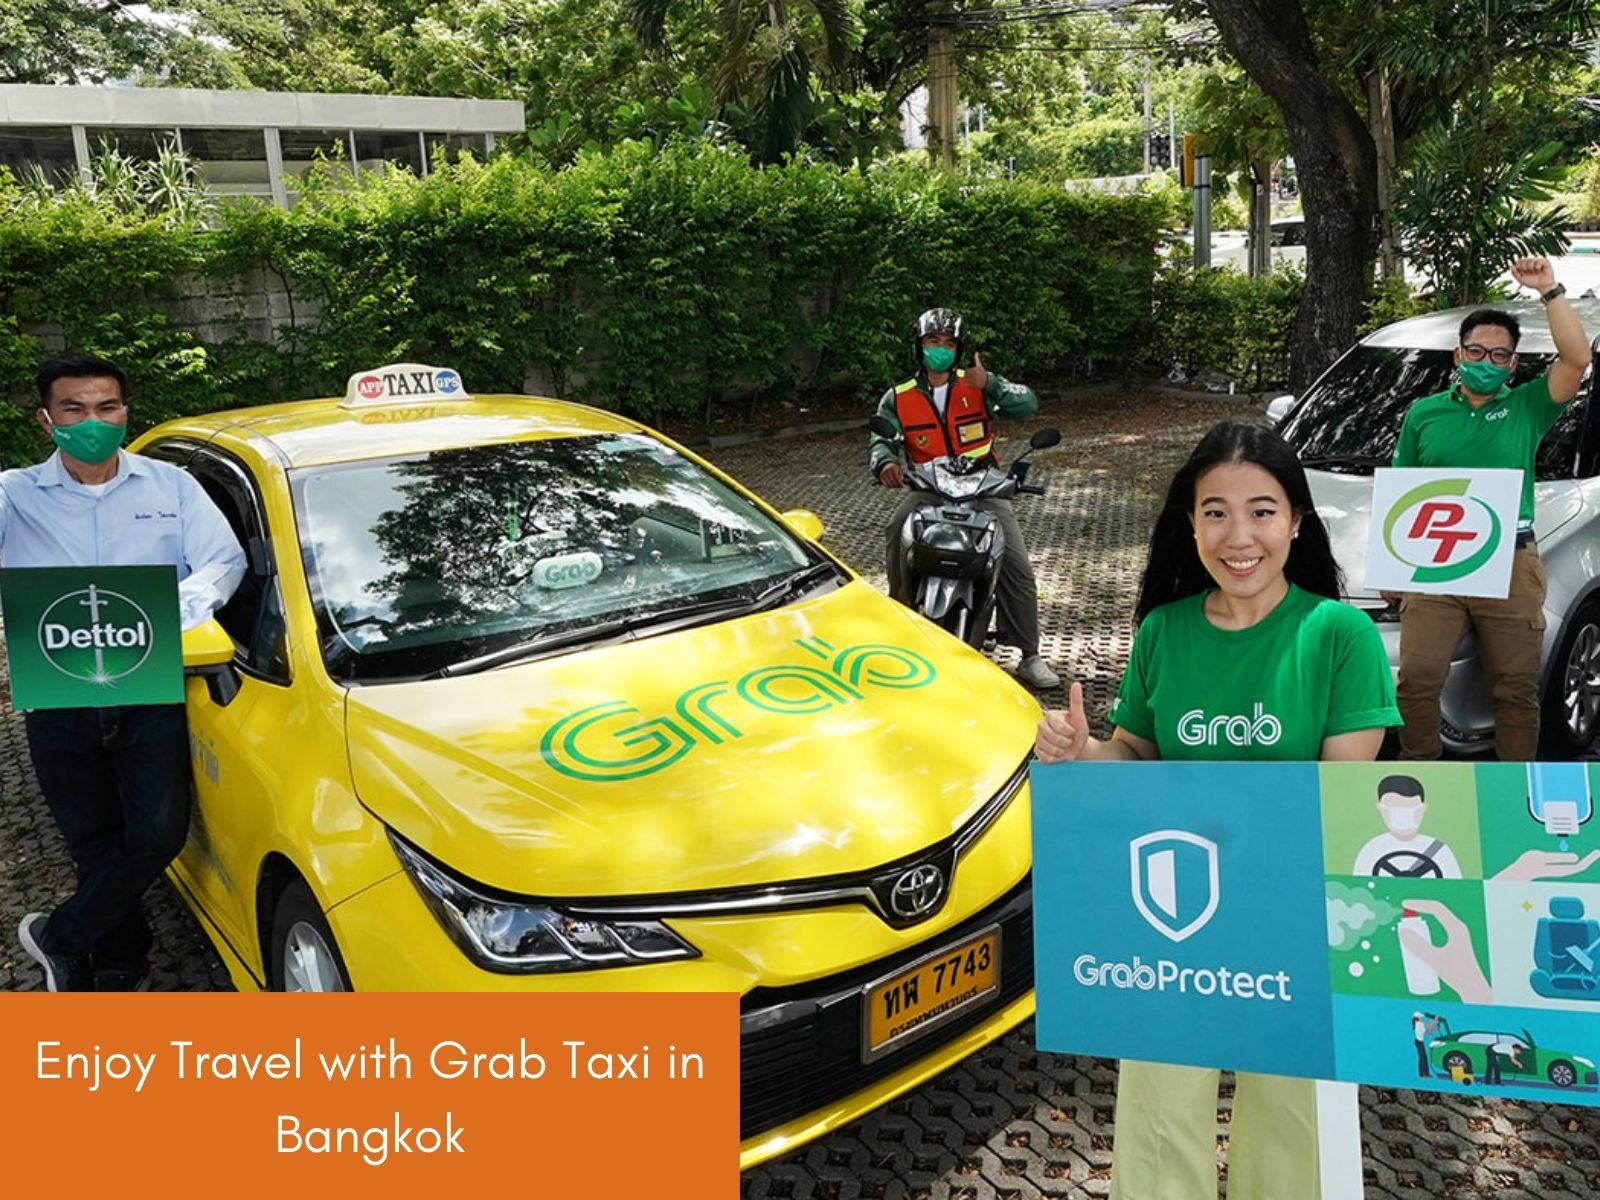 Grab Taxi is convenient and less expensive